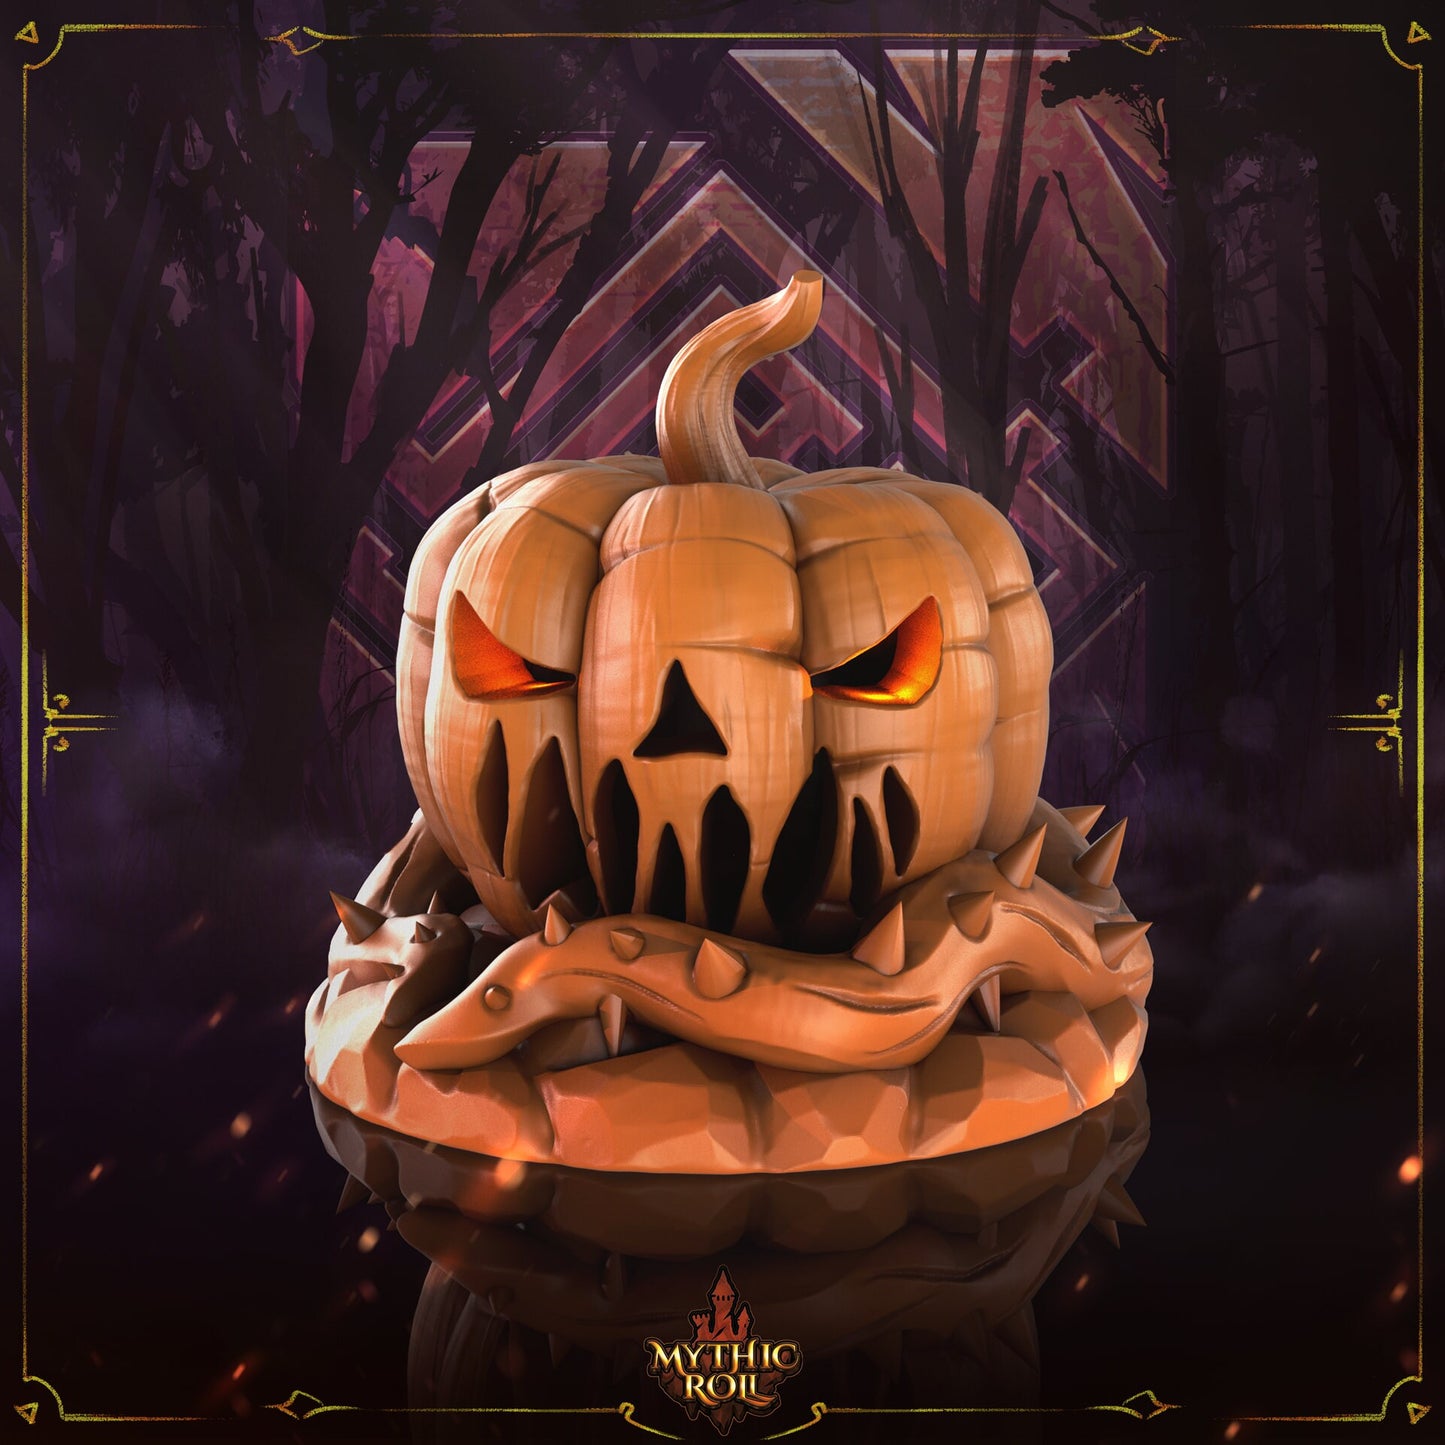 Pumpkin Jack O' Lantern 3D Printed Dice Jail - Mythic Roll Collection by Unchained Games - Guard Your Dice with Spooky Delight!